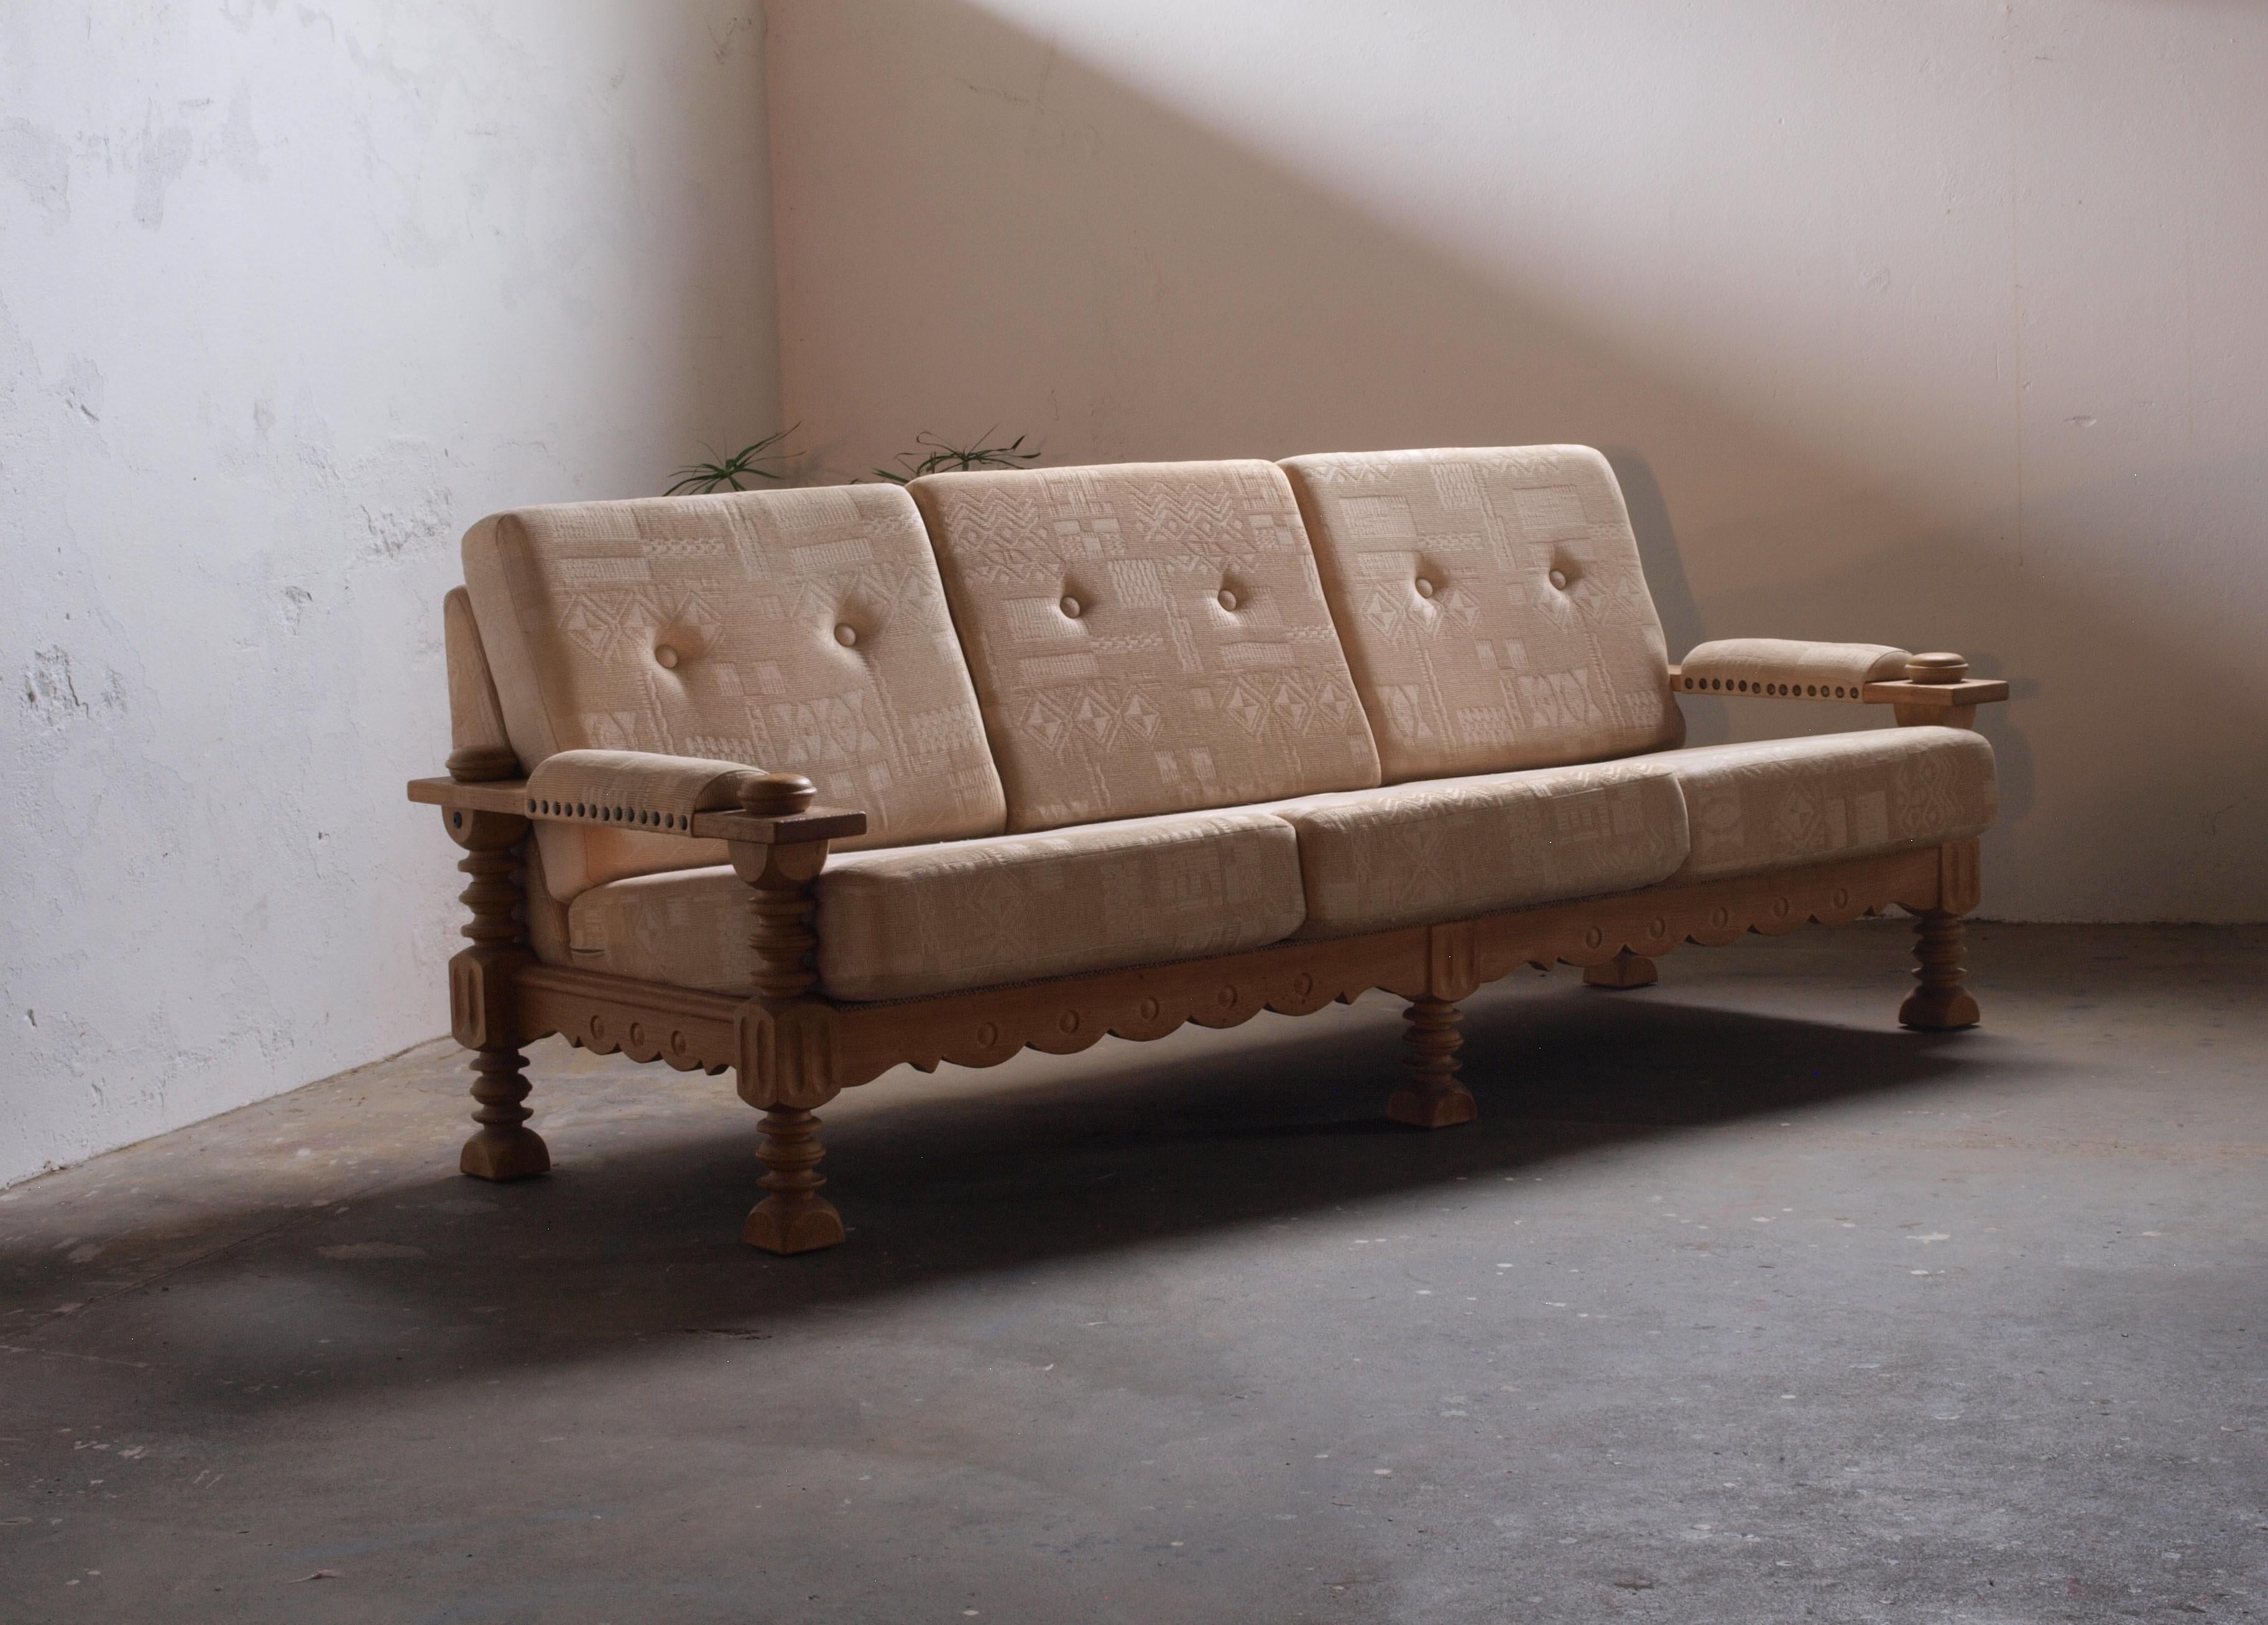 Beautiful brutalist 3/4-seater sofa attributed to Henning Kjærnulf. The beautiful turned legs give it a rustic expression. Solid oak frame in almost perfect condition.

The item is produced in Denmark in the 1960s. Extremely sculptural. Its low back